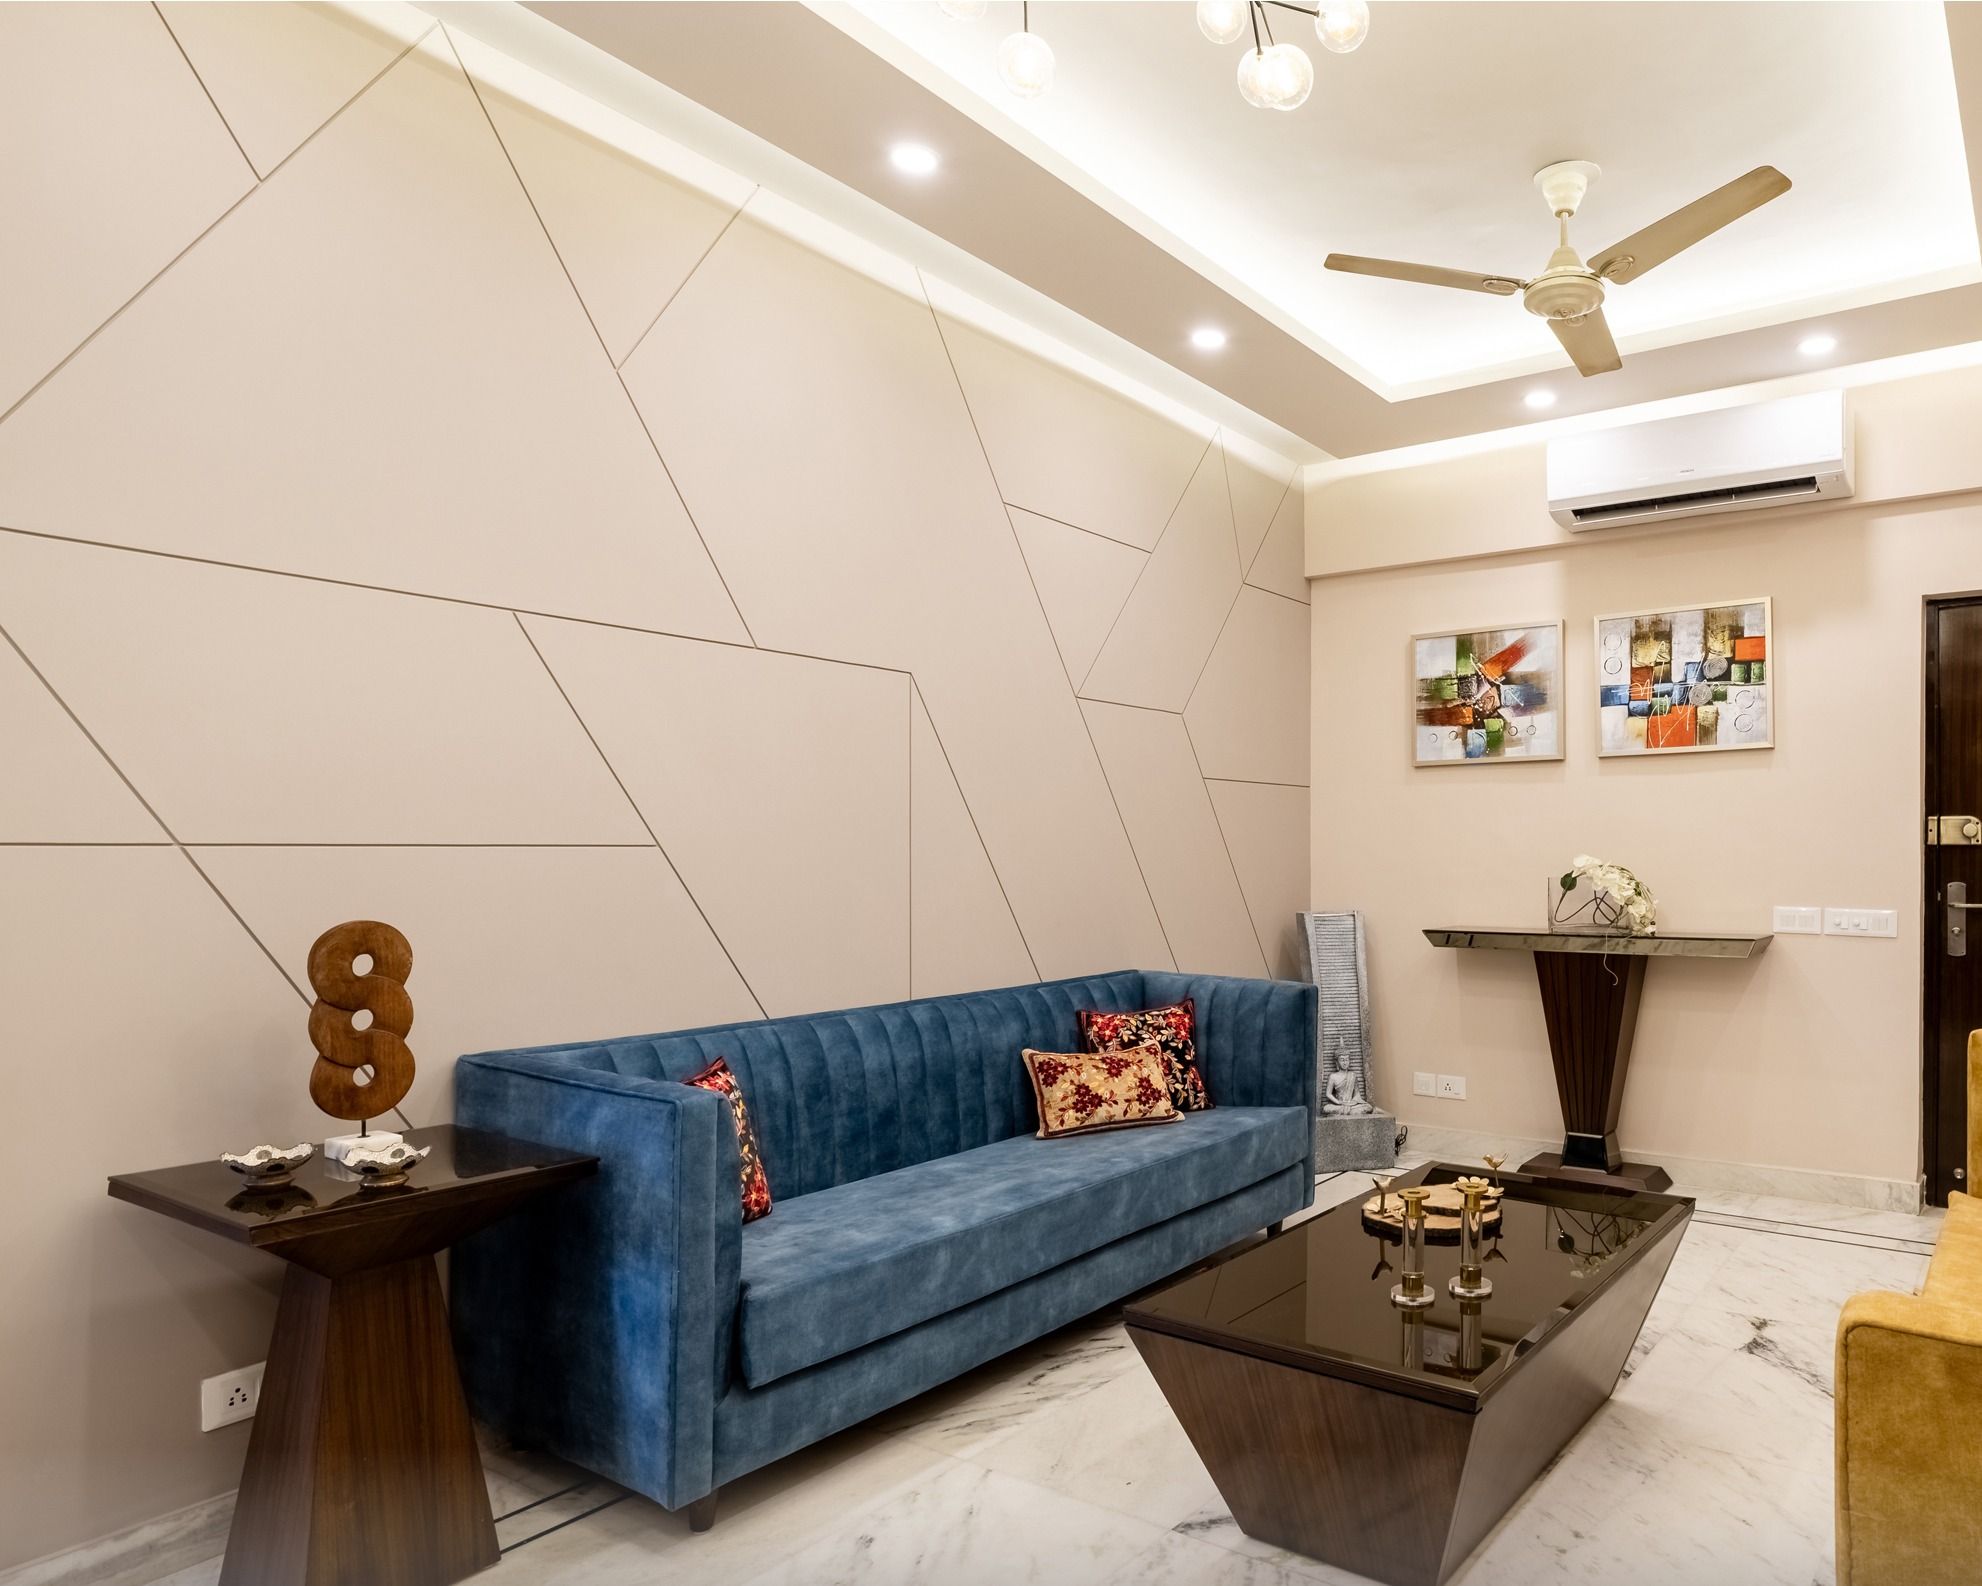 Interior wall designs using 9 splendid materials to enrich the space |  Building and Interiors